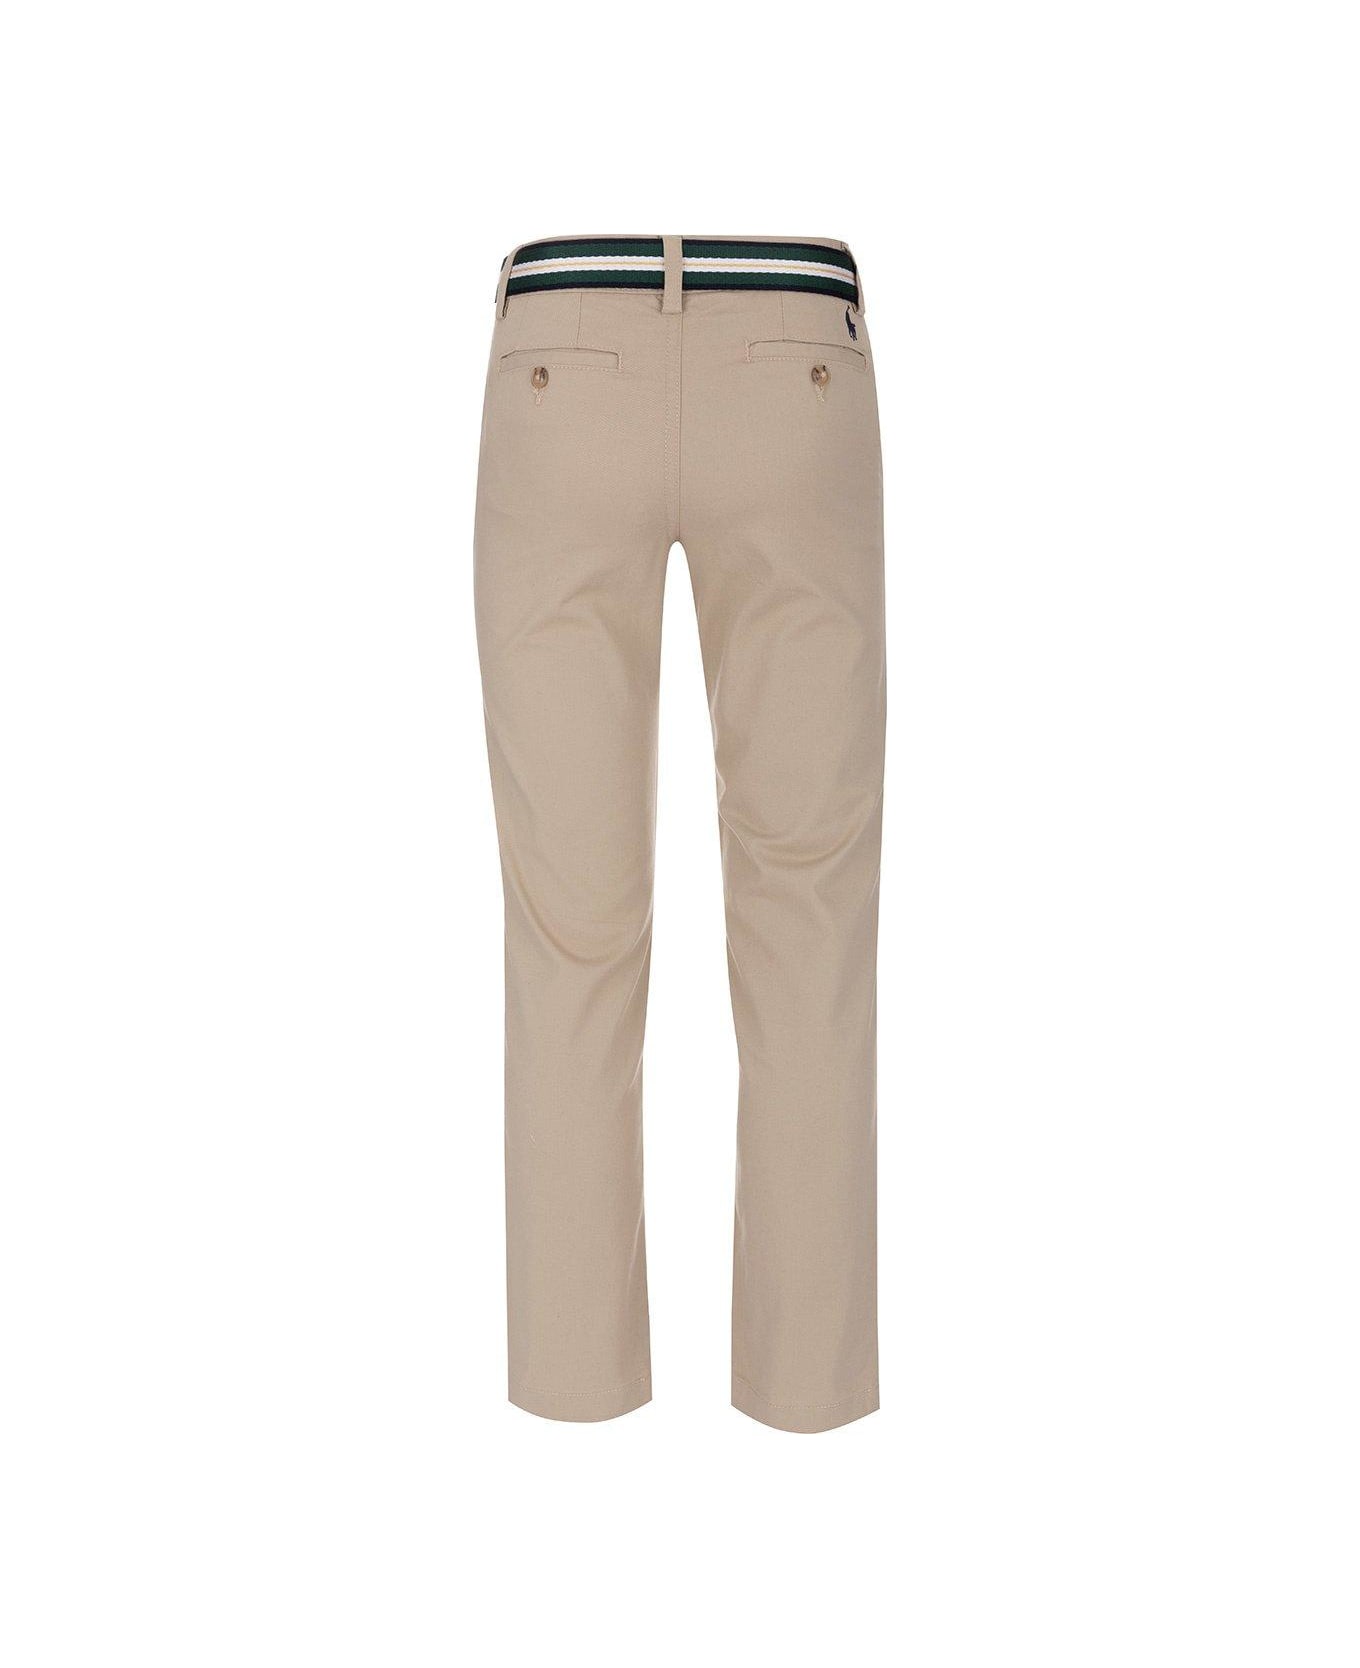 Ralph Lauren Logo Embroidered Belted Trousers - Beige/Khaki